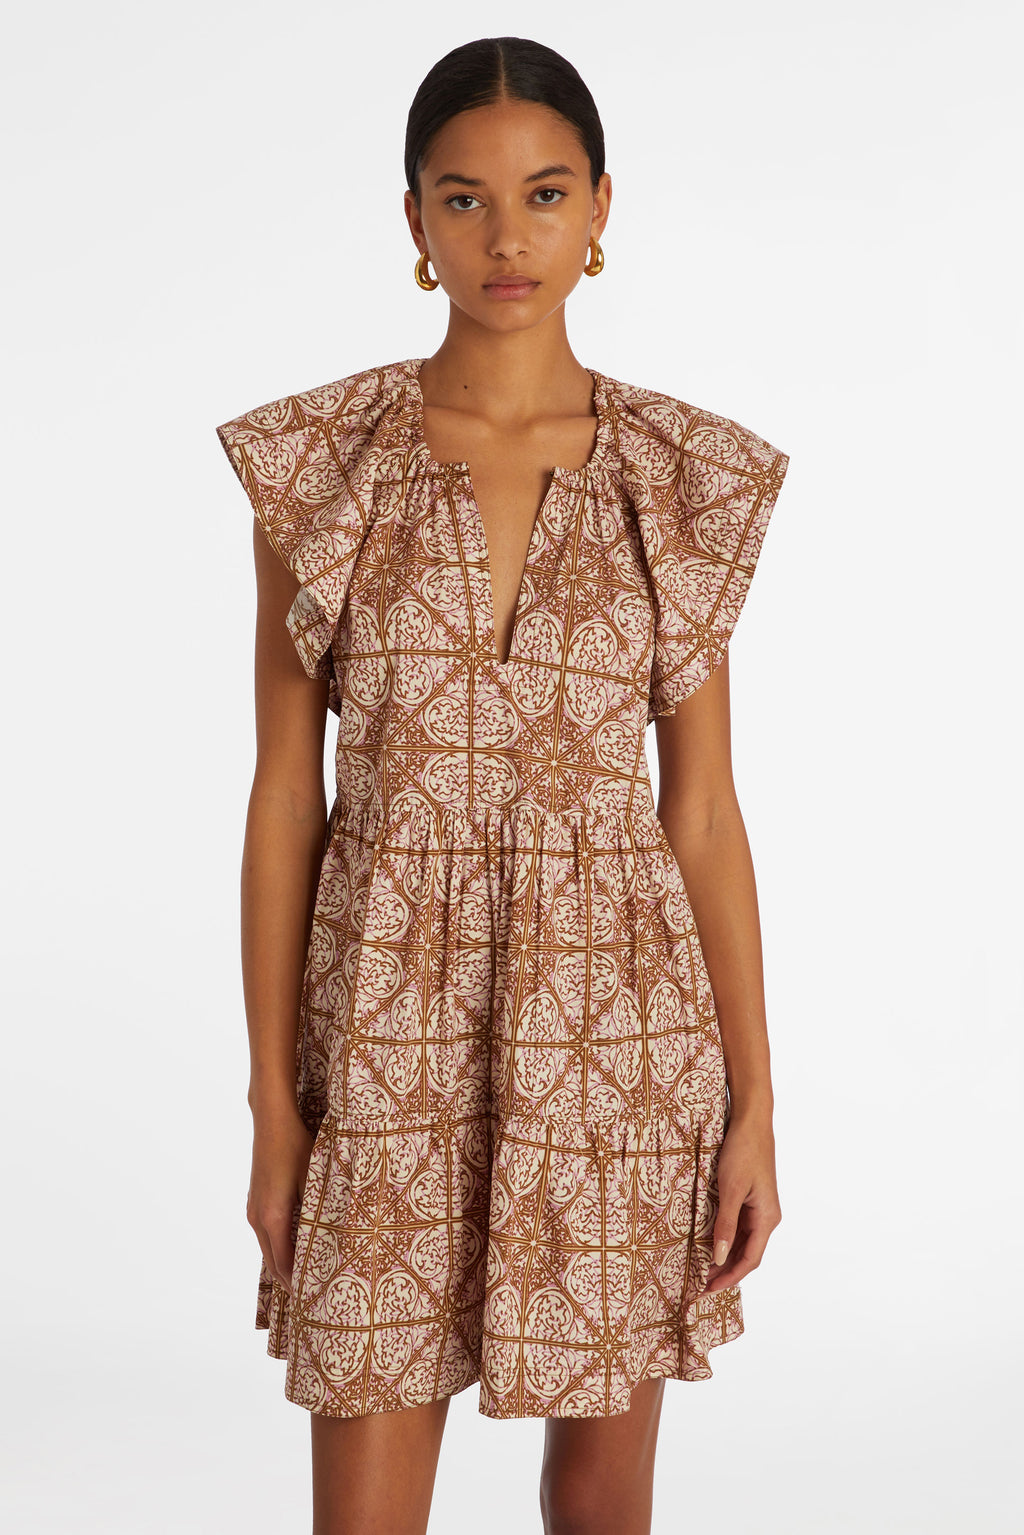 Short dress with large ruffled sleeves in a pink and brown mosaic tile print